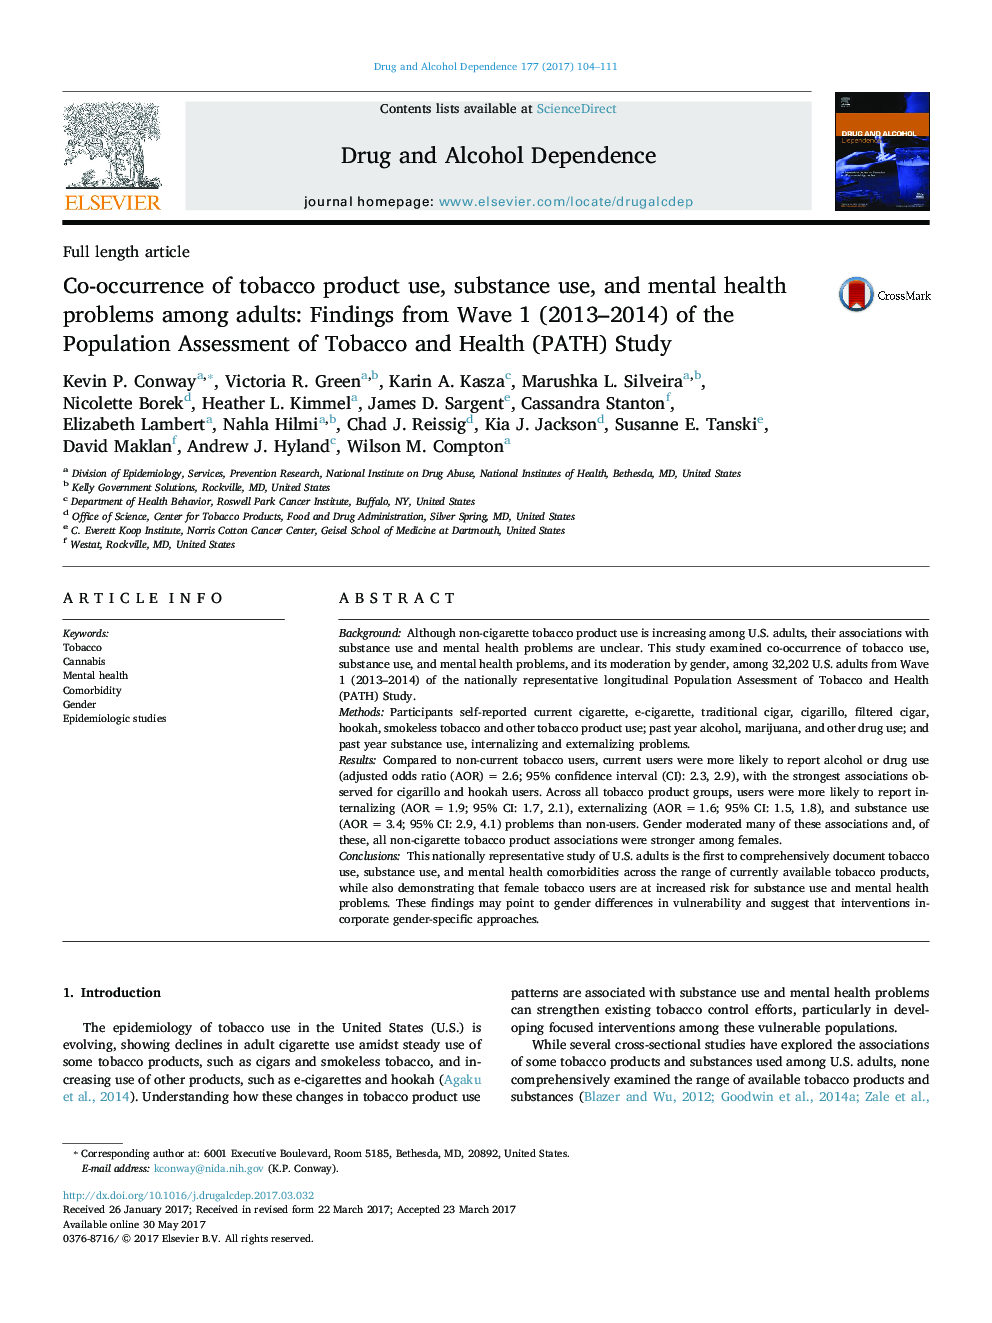 Full length articleCo-occurrence of tobacco product use, substance use, and mental health problems among adults: Findings from Wave 1 (2013-2014) of the Population Assessment of Tobacco and Health (PATH) Study